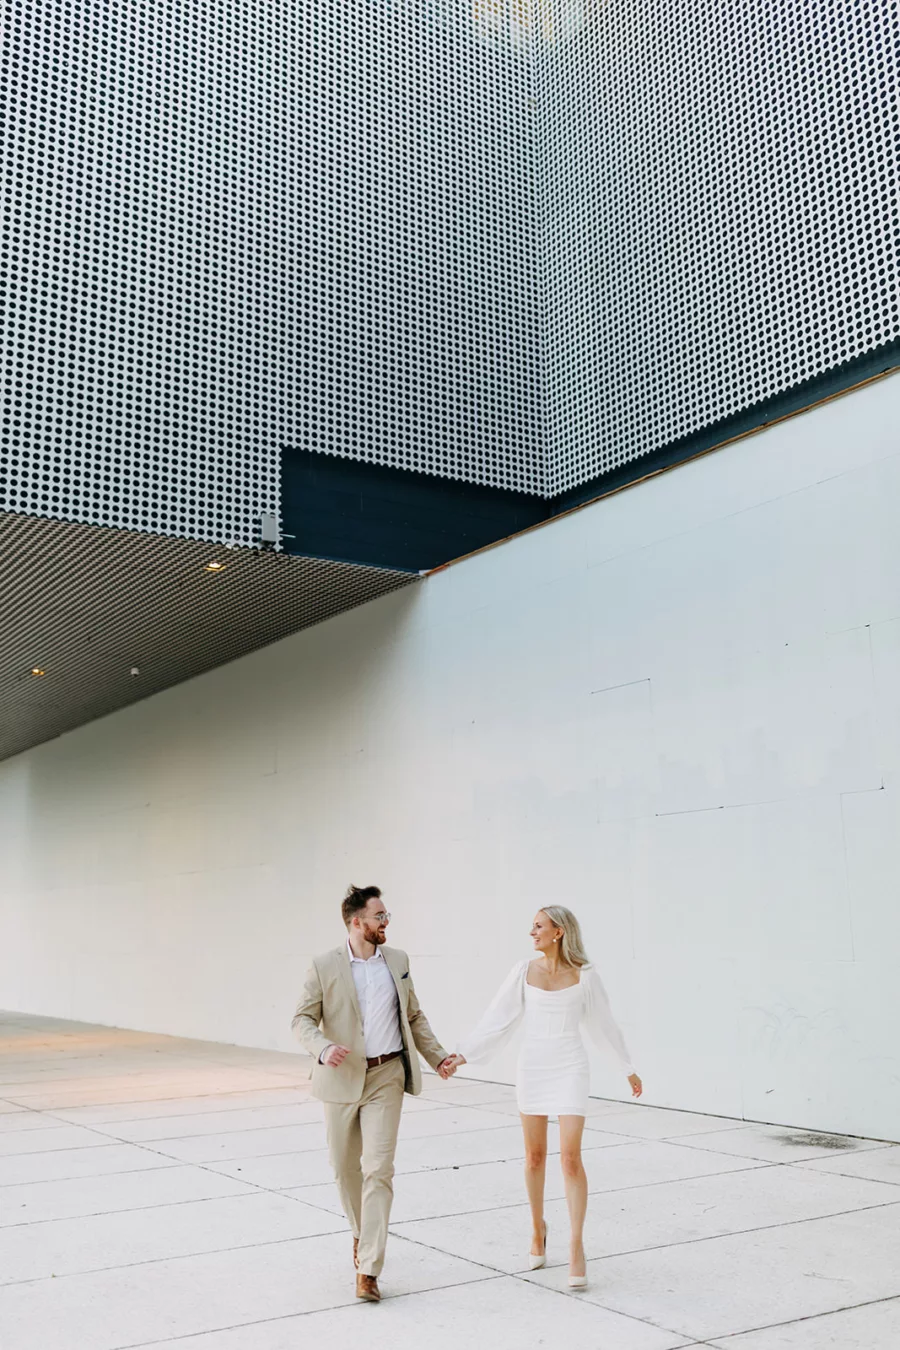 Downtown Tampa Curtis Hixon Riverwalk Engagement Session Photographer | Amber McWhorter Photography